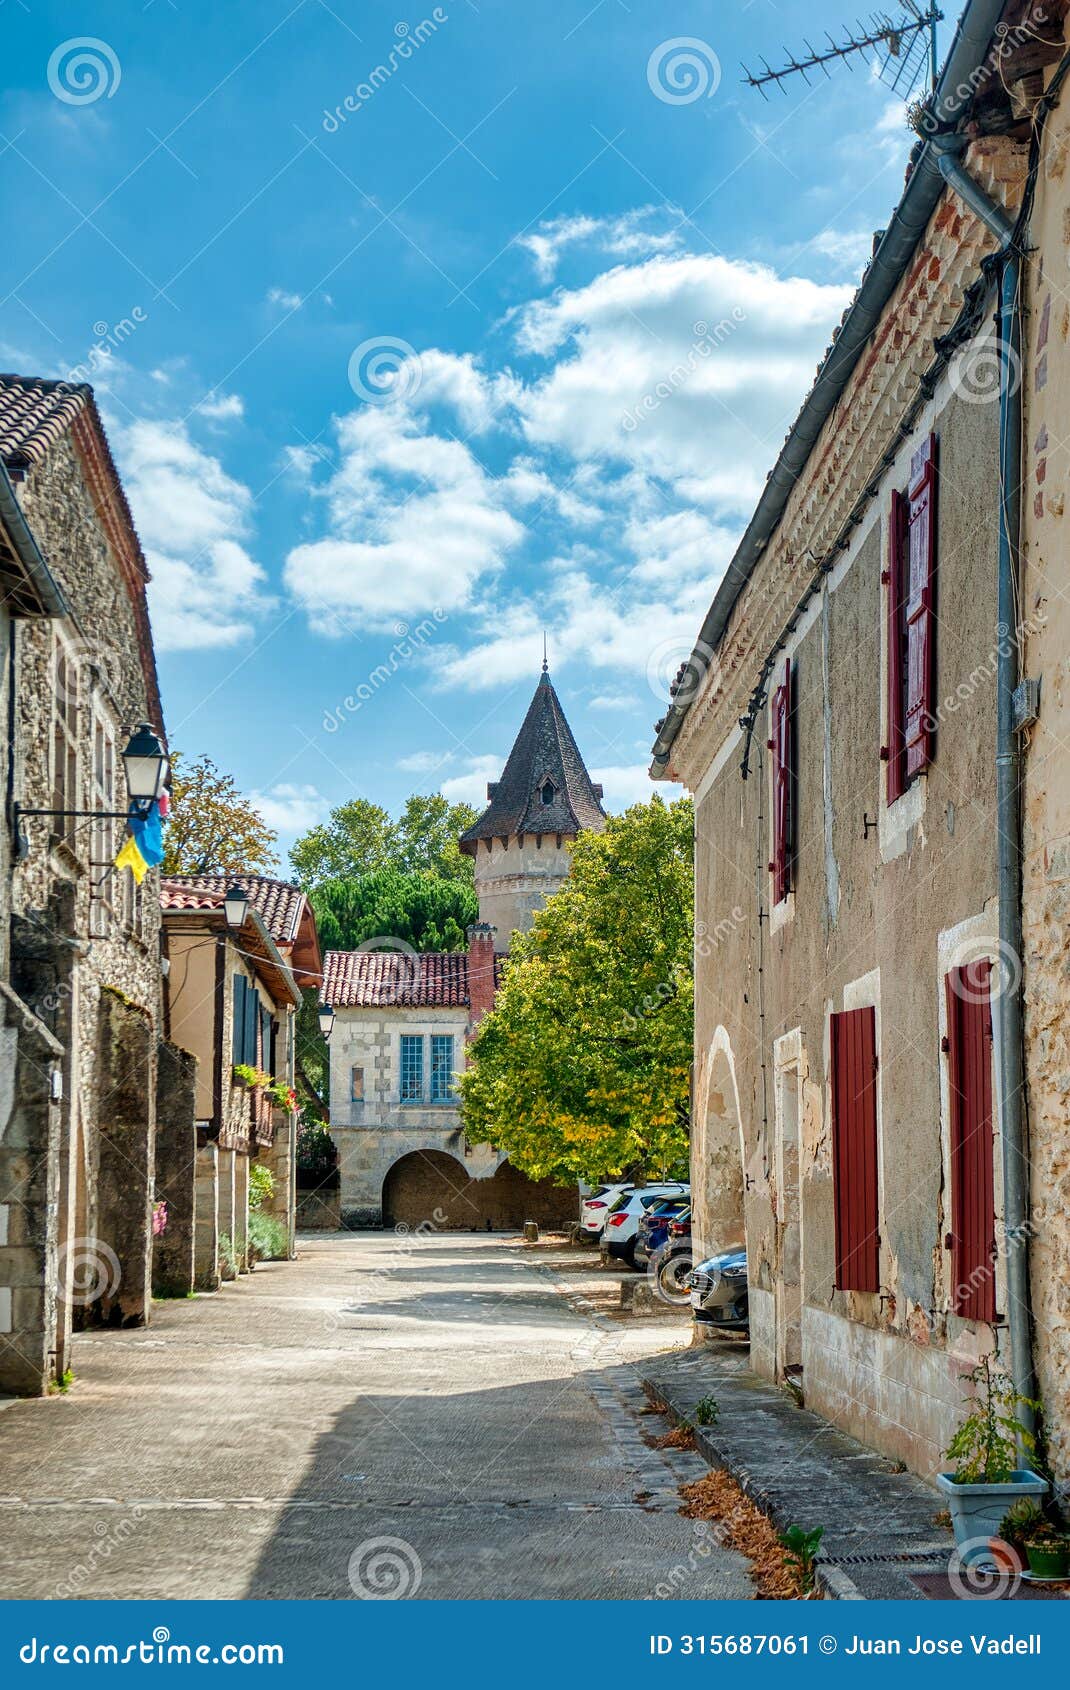 saint-justin is a town and commune in france, located in the aquitaine region, landes department, in the district of mont-de-